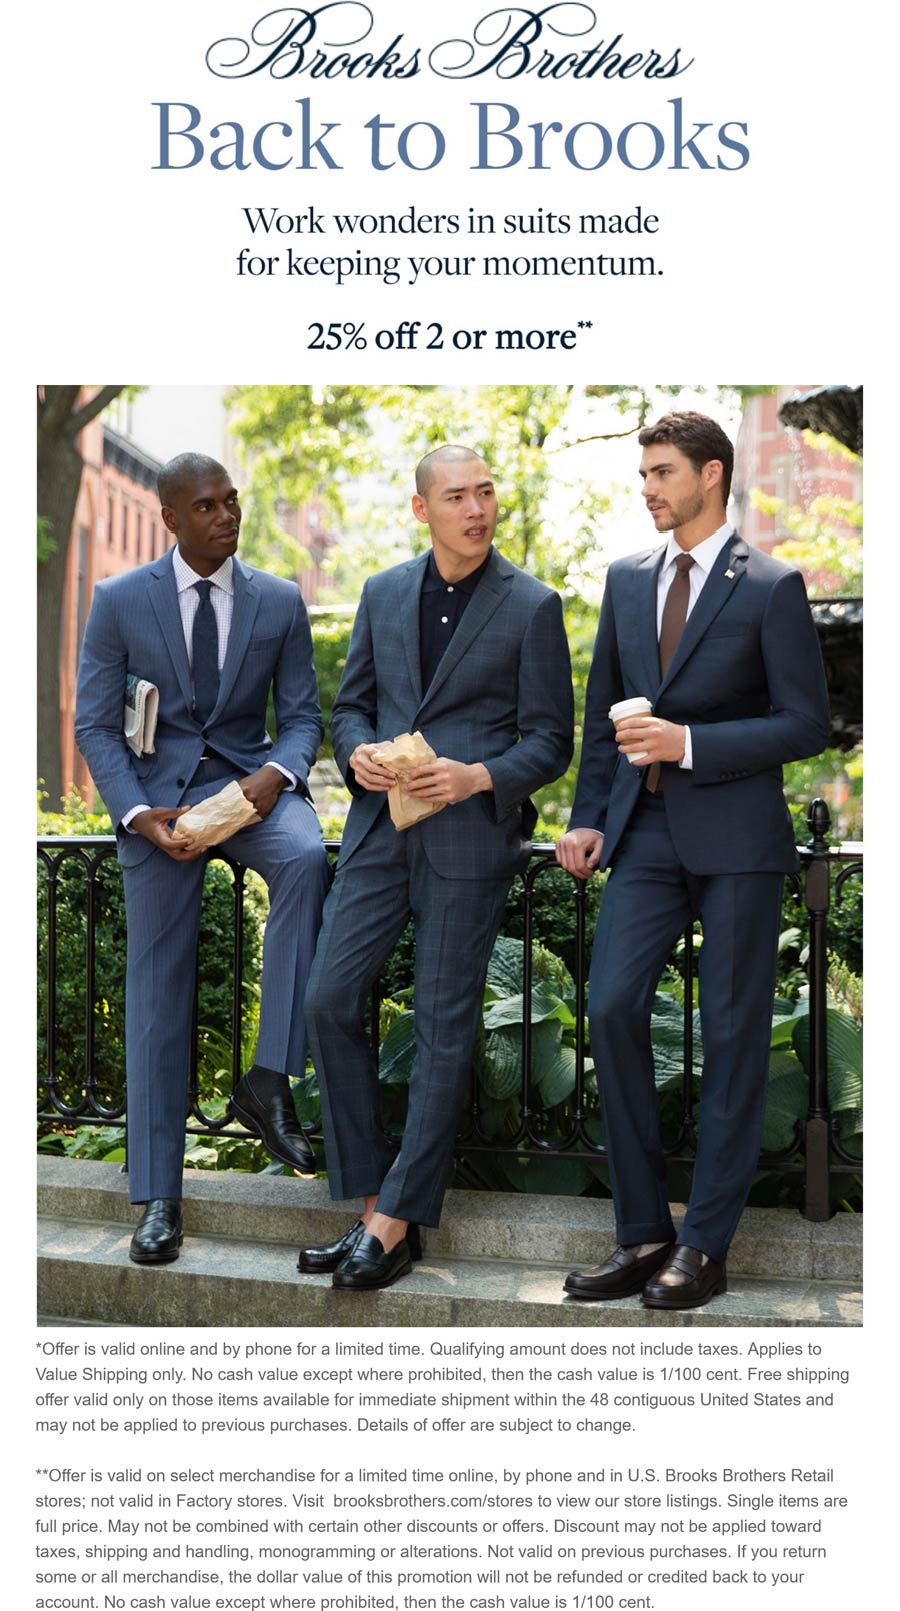 Brooks Brothers stores Coupon  25% off 2+ suits at Brooks Brothers, ditto online #brooksbrothers 